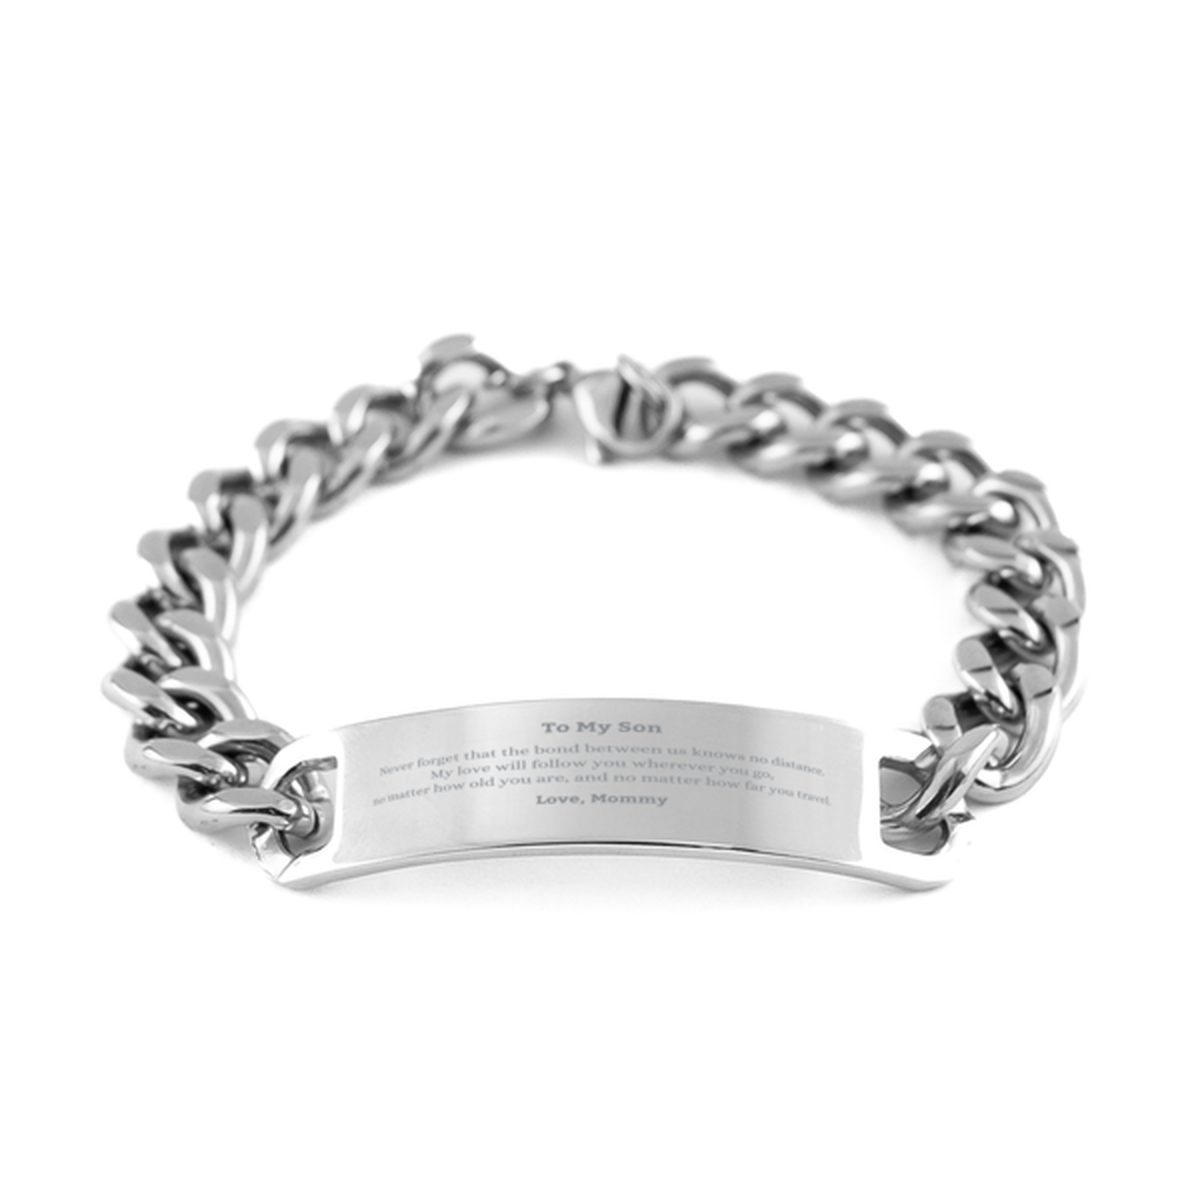 Son Birthday Gifts from Mommy, Adjustable Cuban Chain Stainless Steel Bracelet for Son Christmas Graduation Unique Gifts Son Never forget that the bond between us knows no distance. Love, Mommy